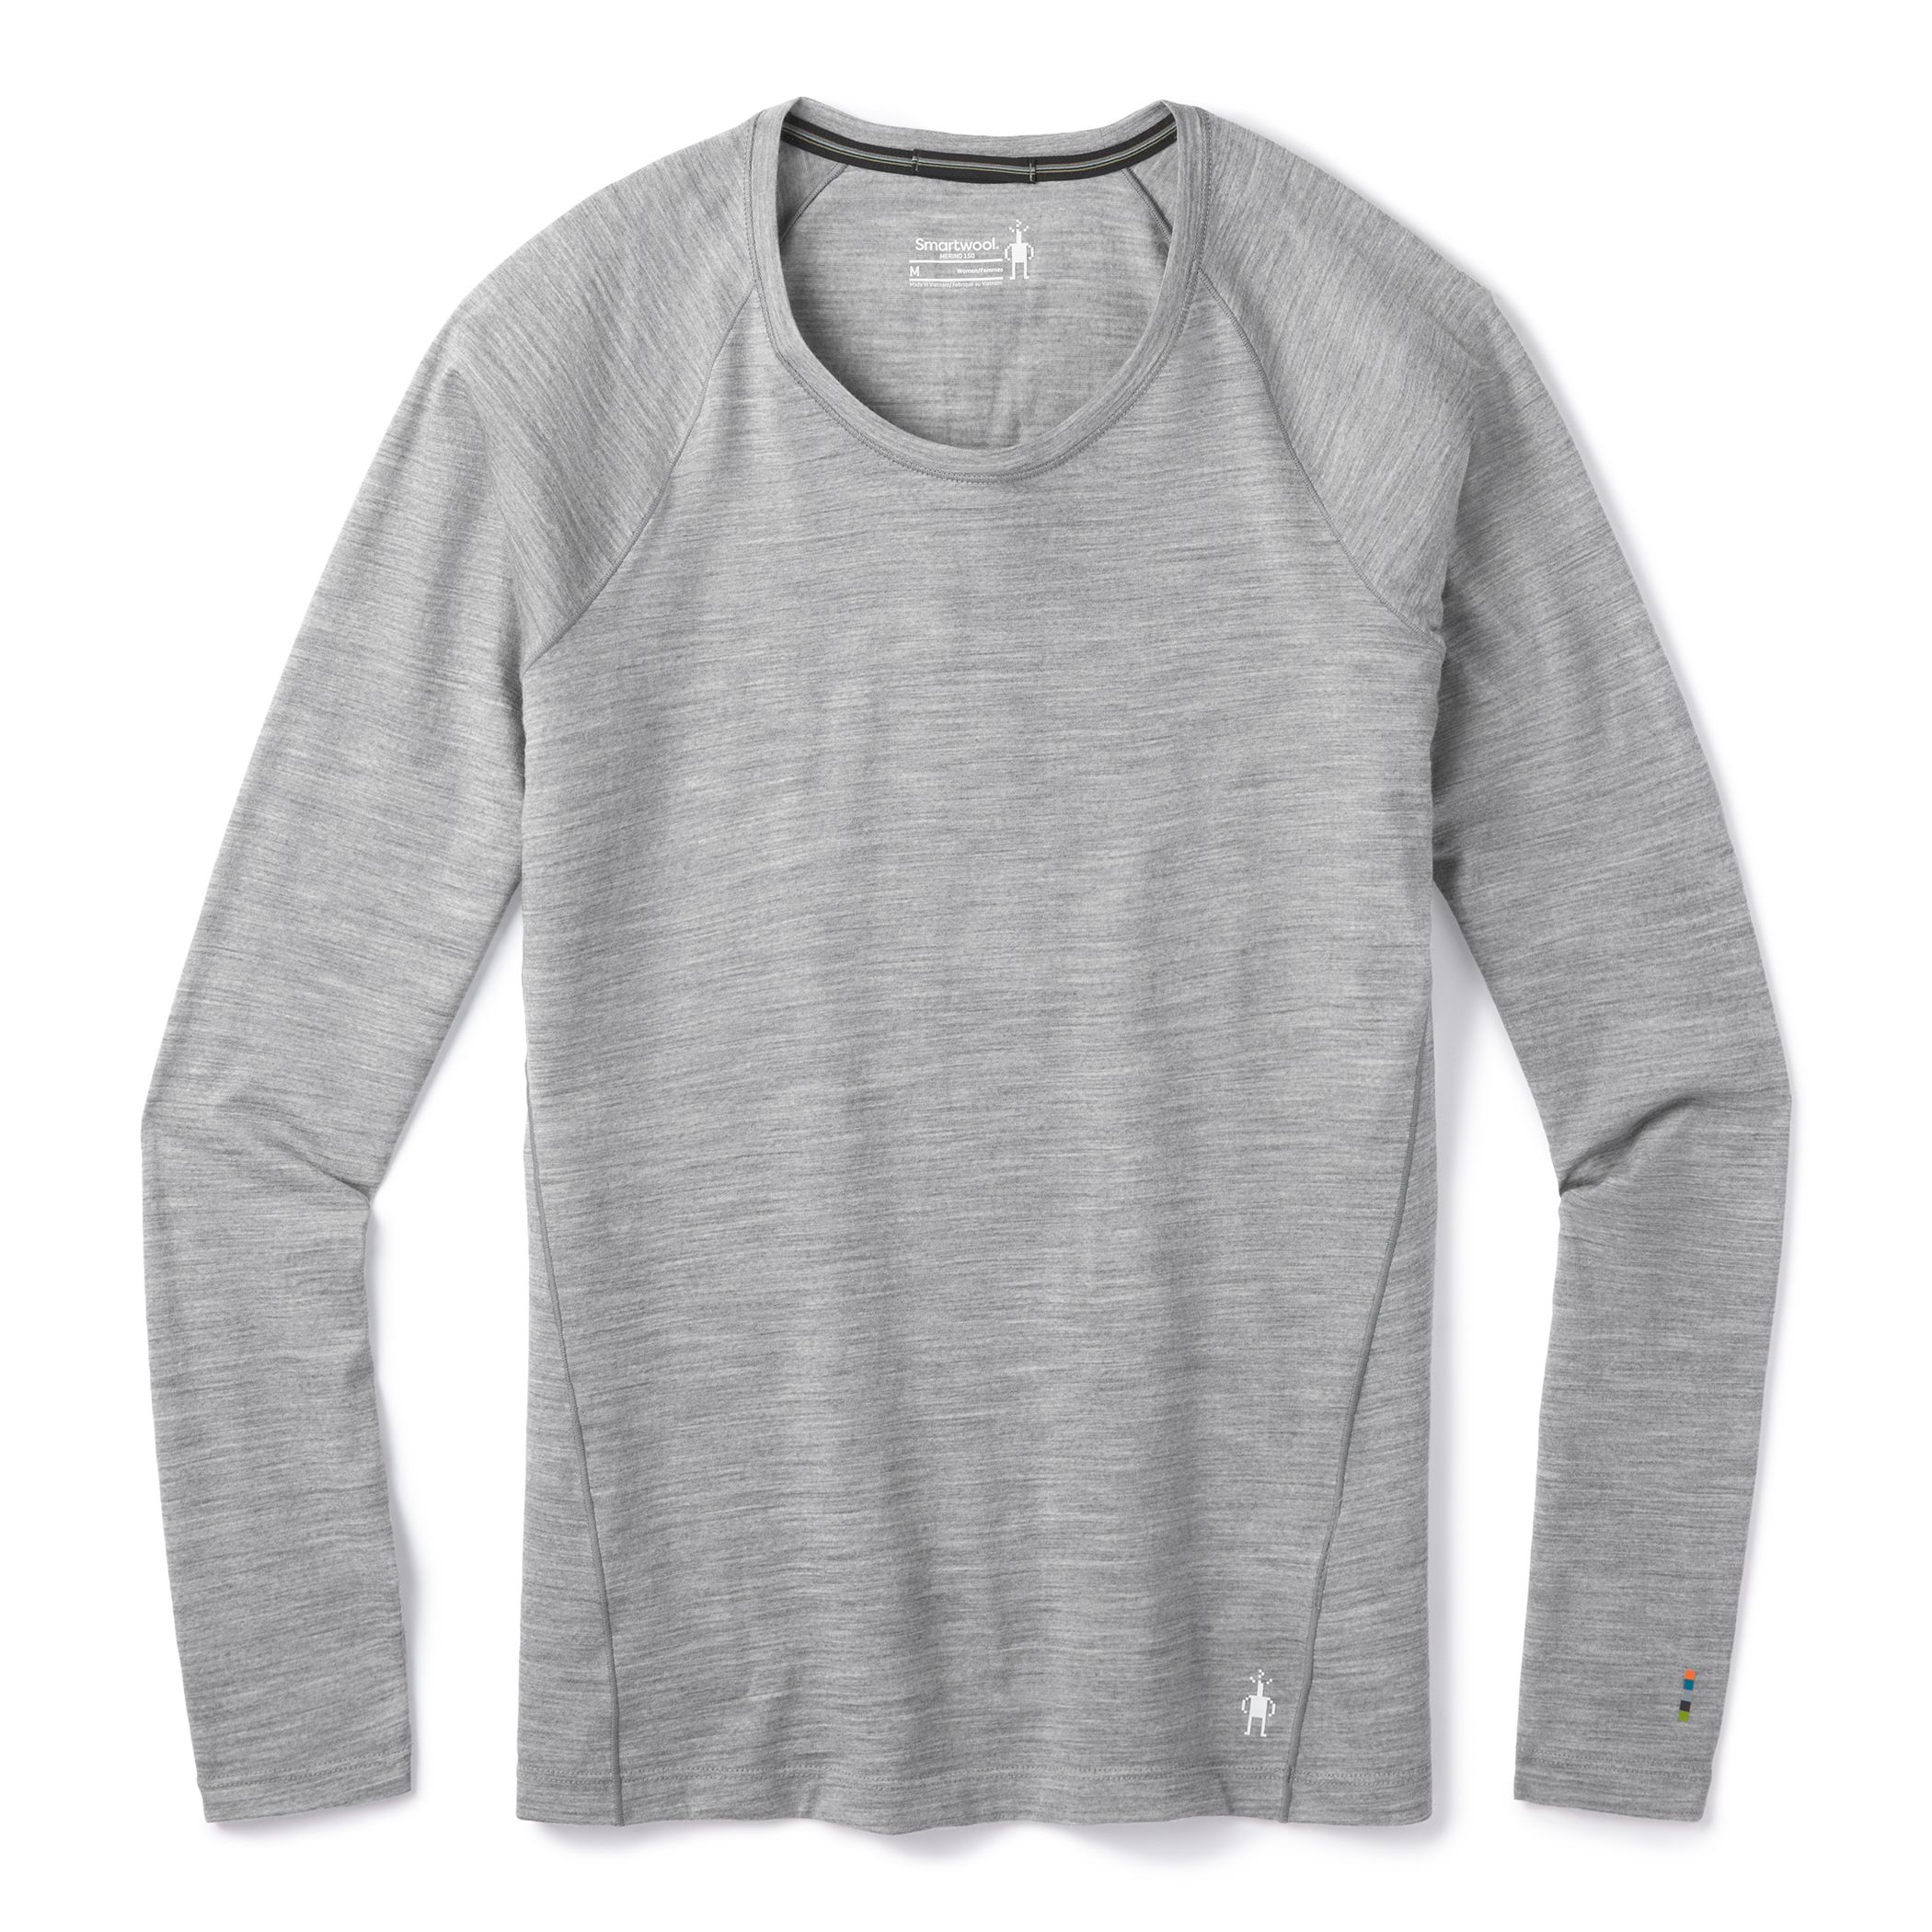 Women's Wool Long Sleeve Base Layer Chill Chasers Collection